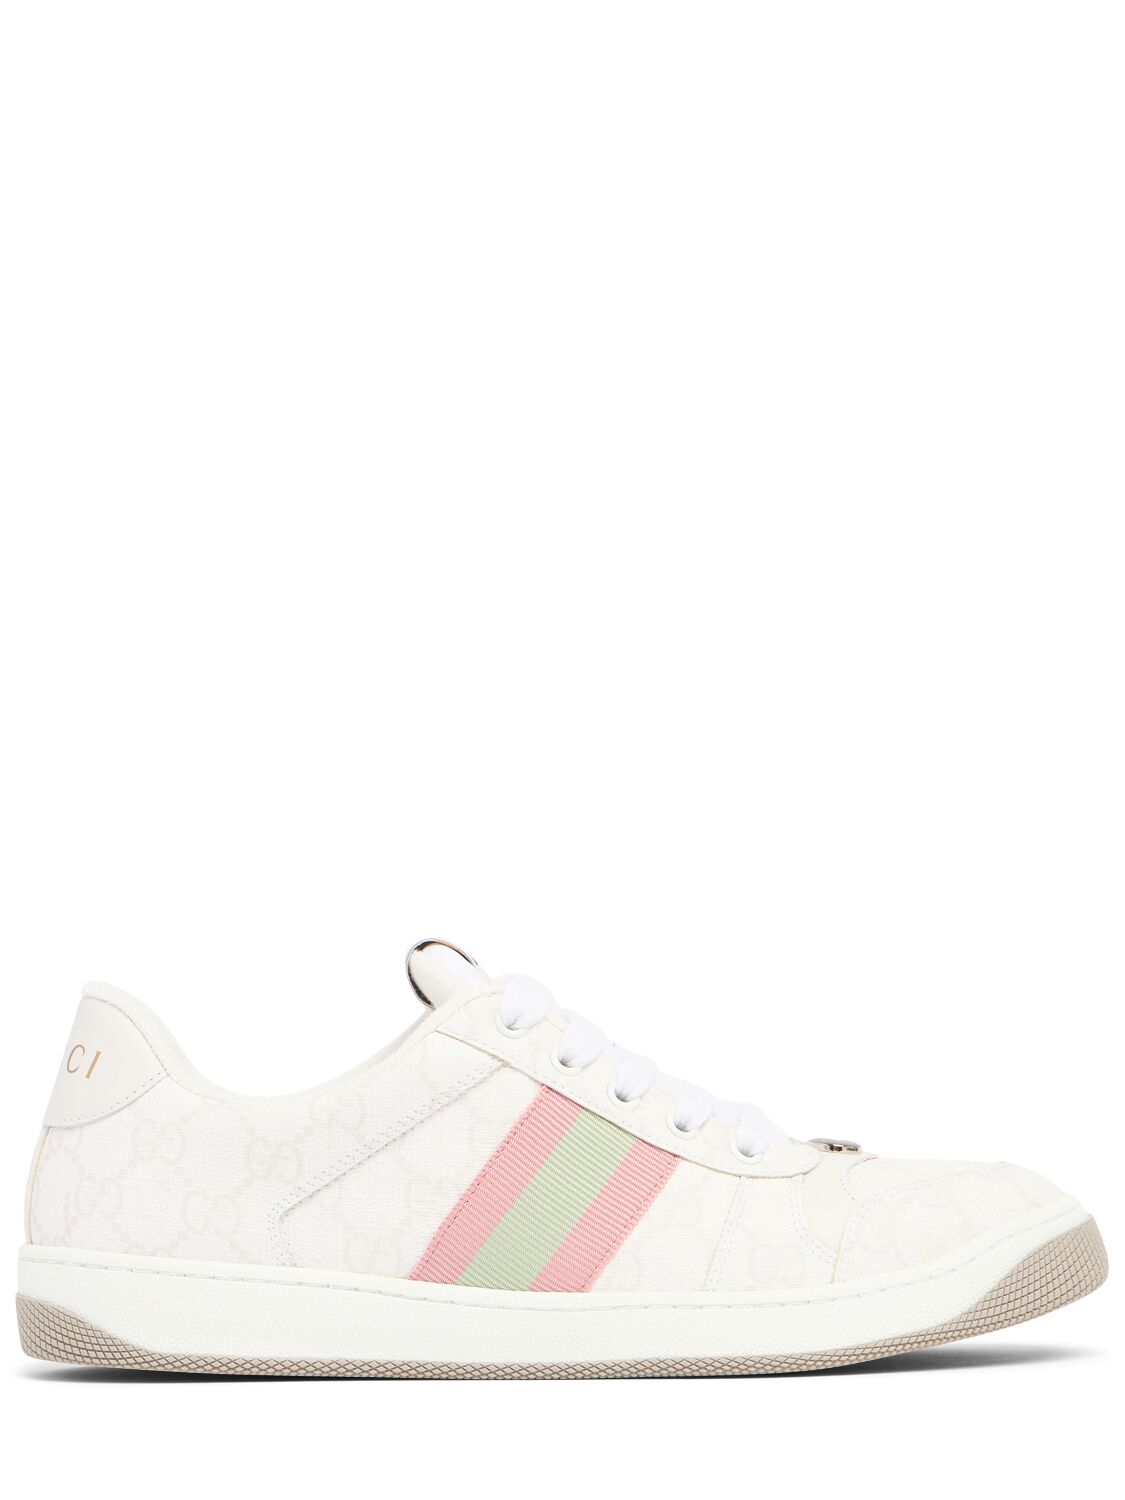 Gucci 30mm Screener Canvas Trainer Sneakers In White,pink